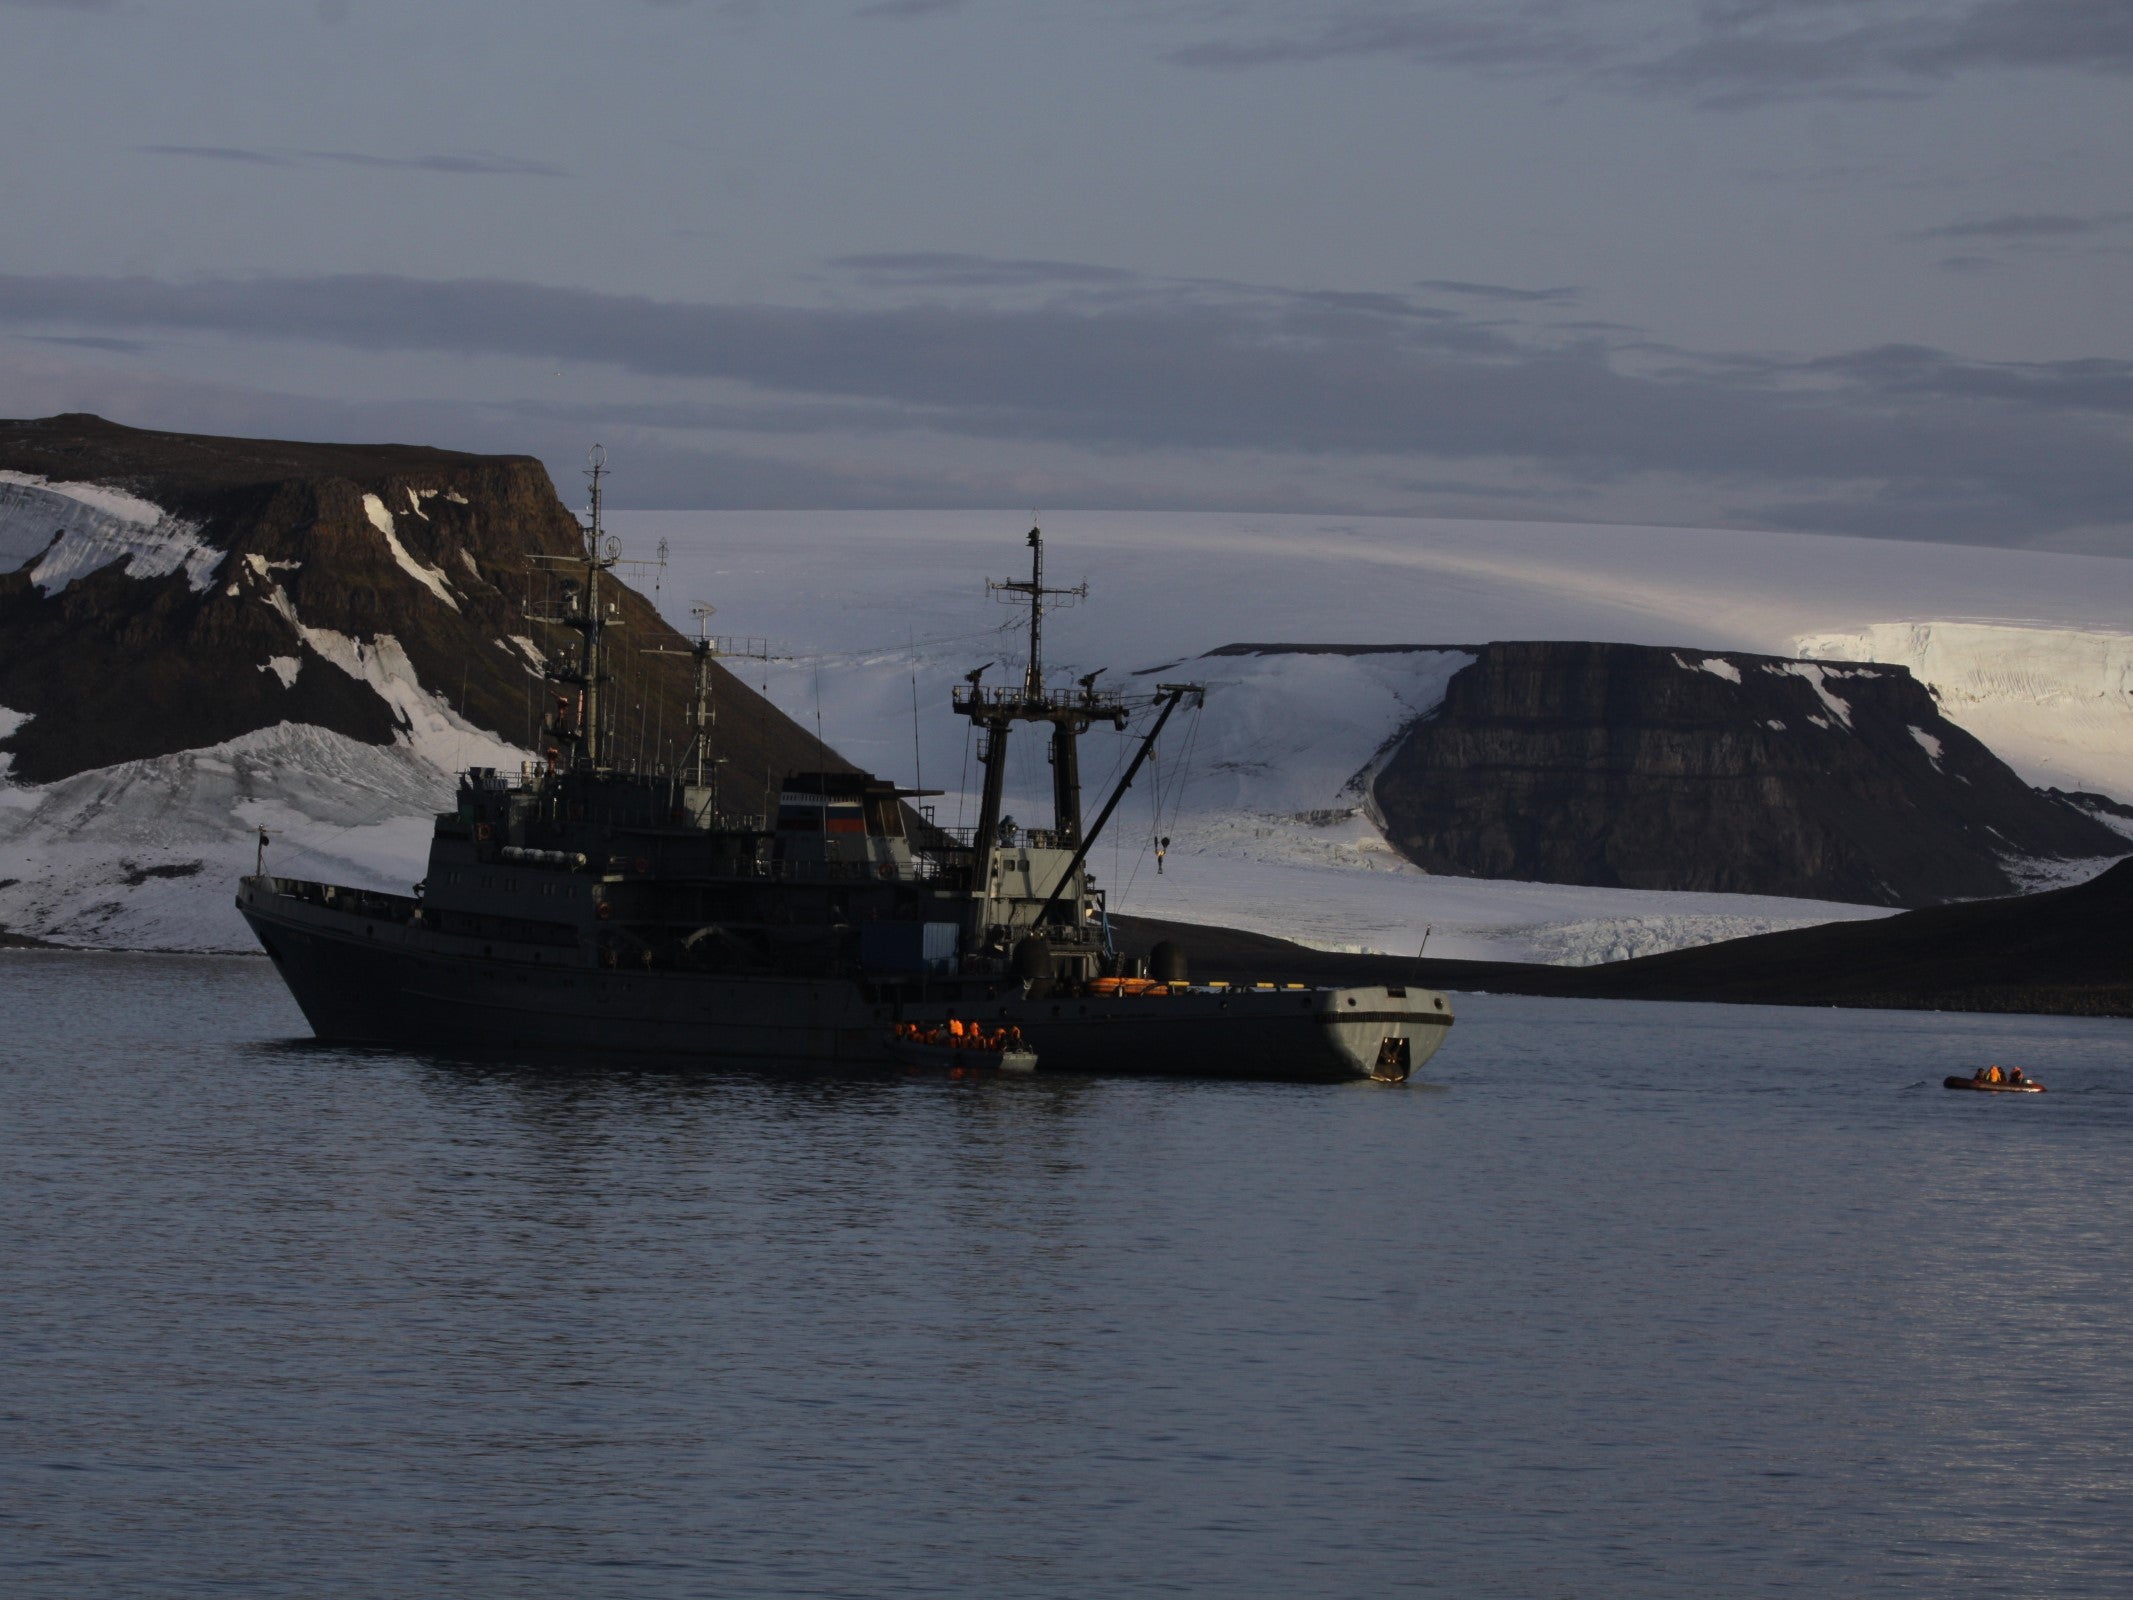 The main Russian naval vessel taking part in the Franz Josef Land expedition